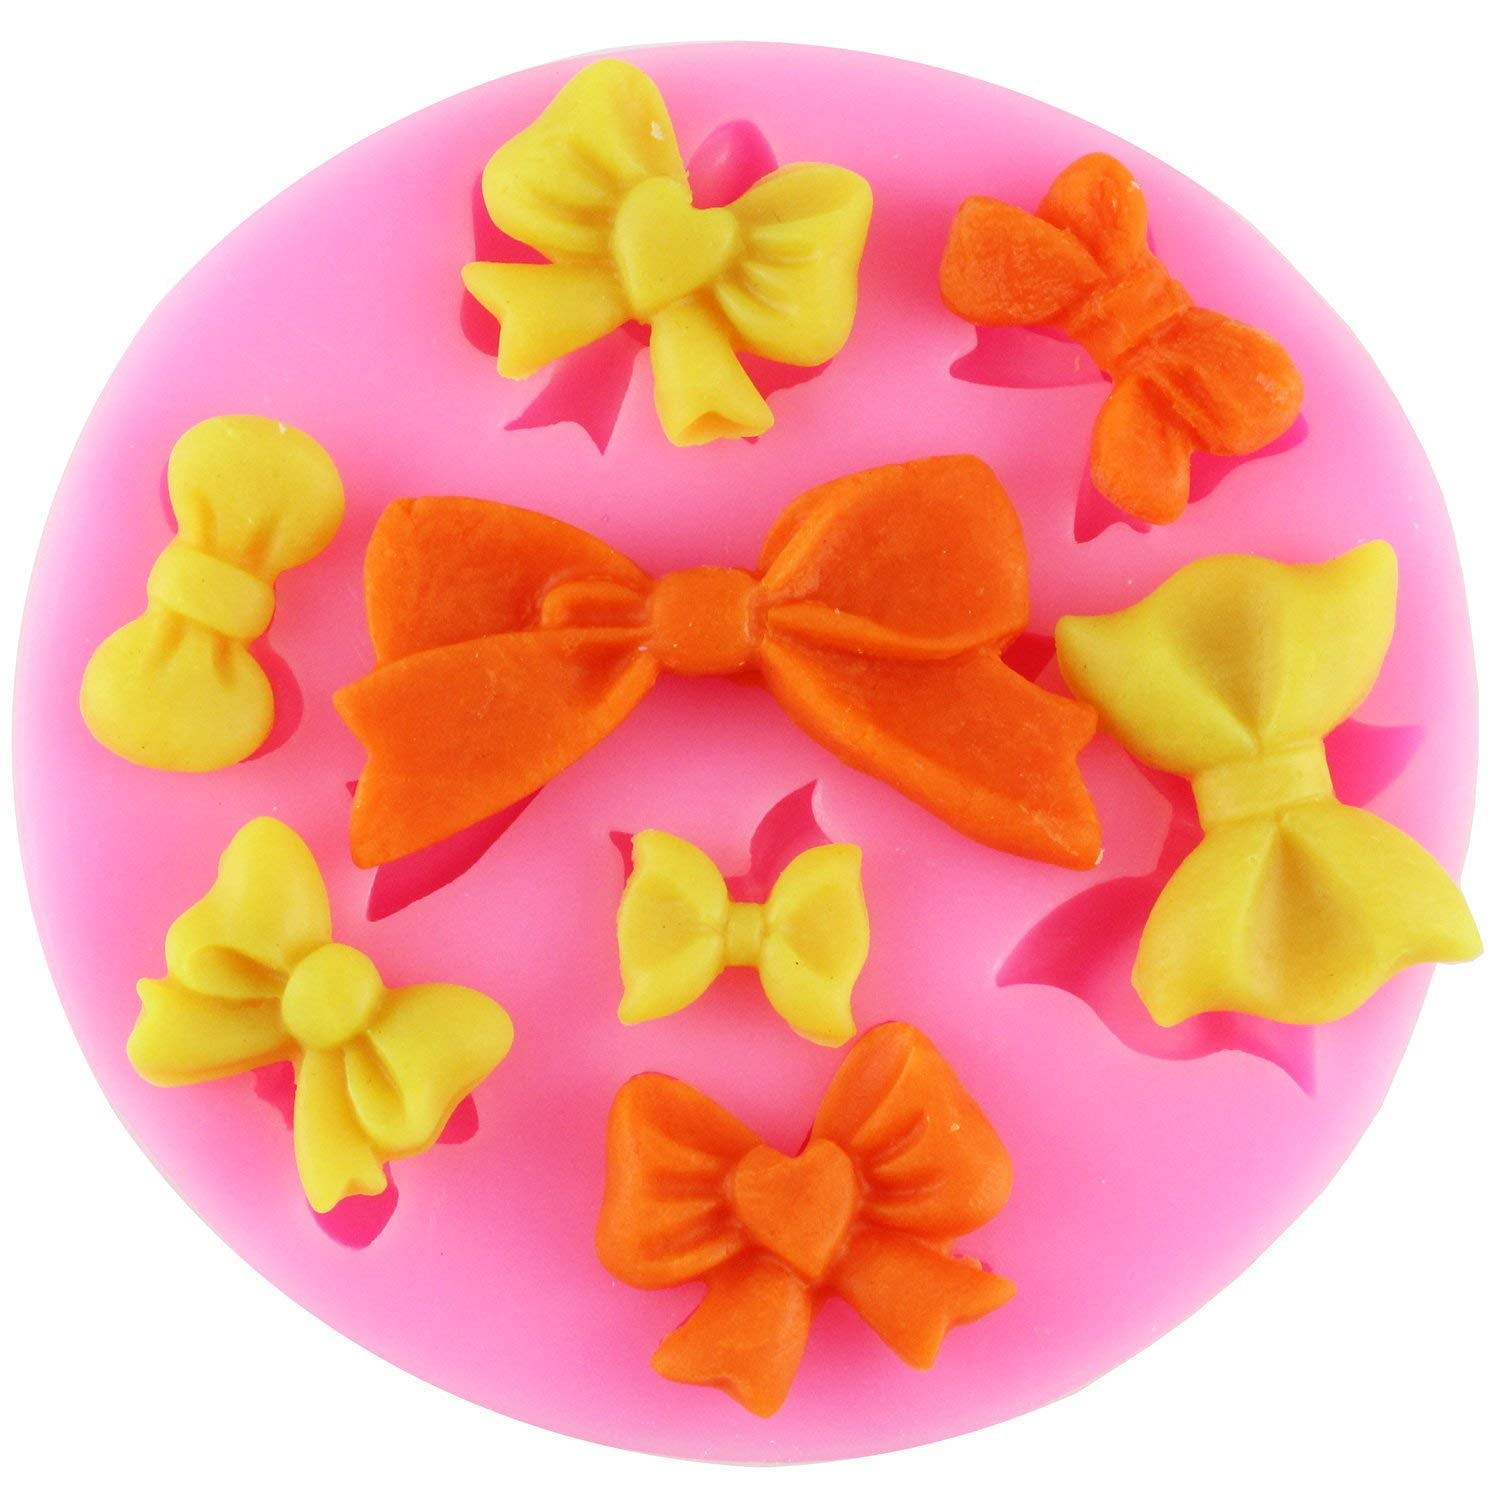 Bow Tie Style Decor Fondant Cake Mold Food Grade Silicone Baking Mould LP 